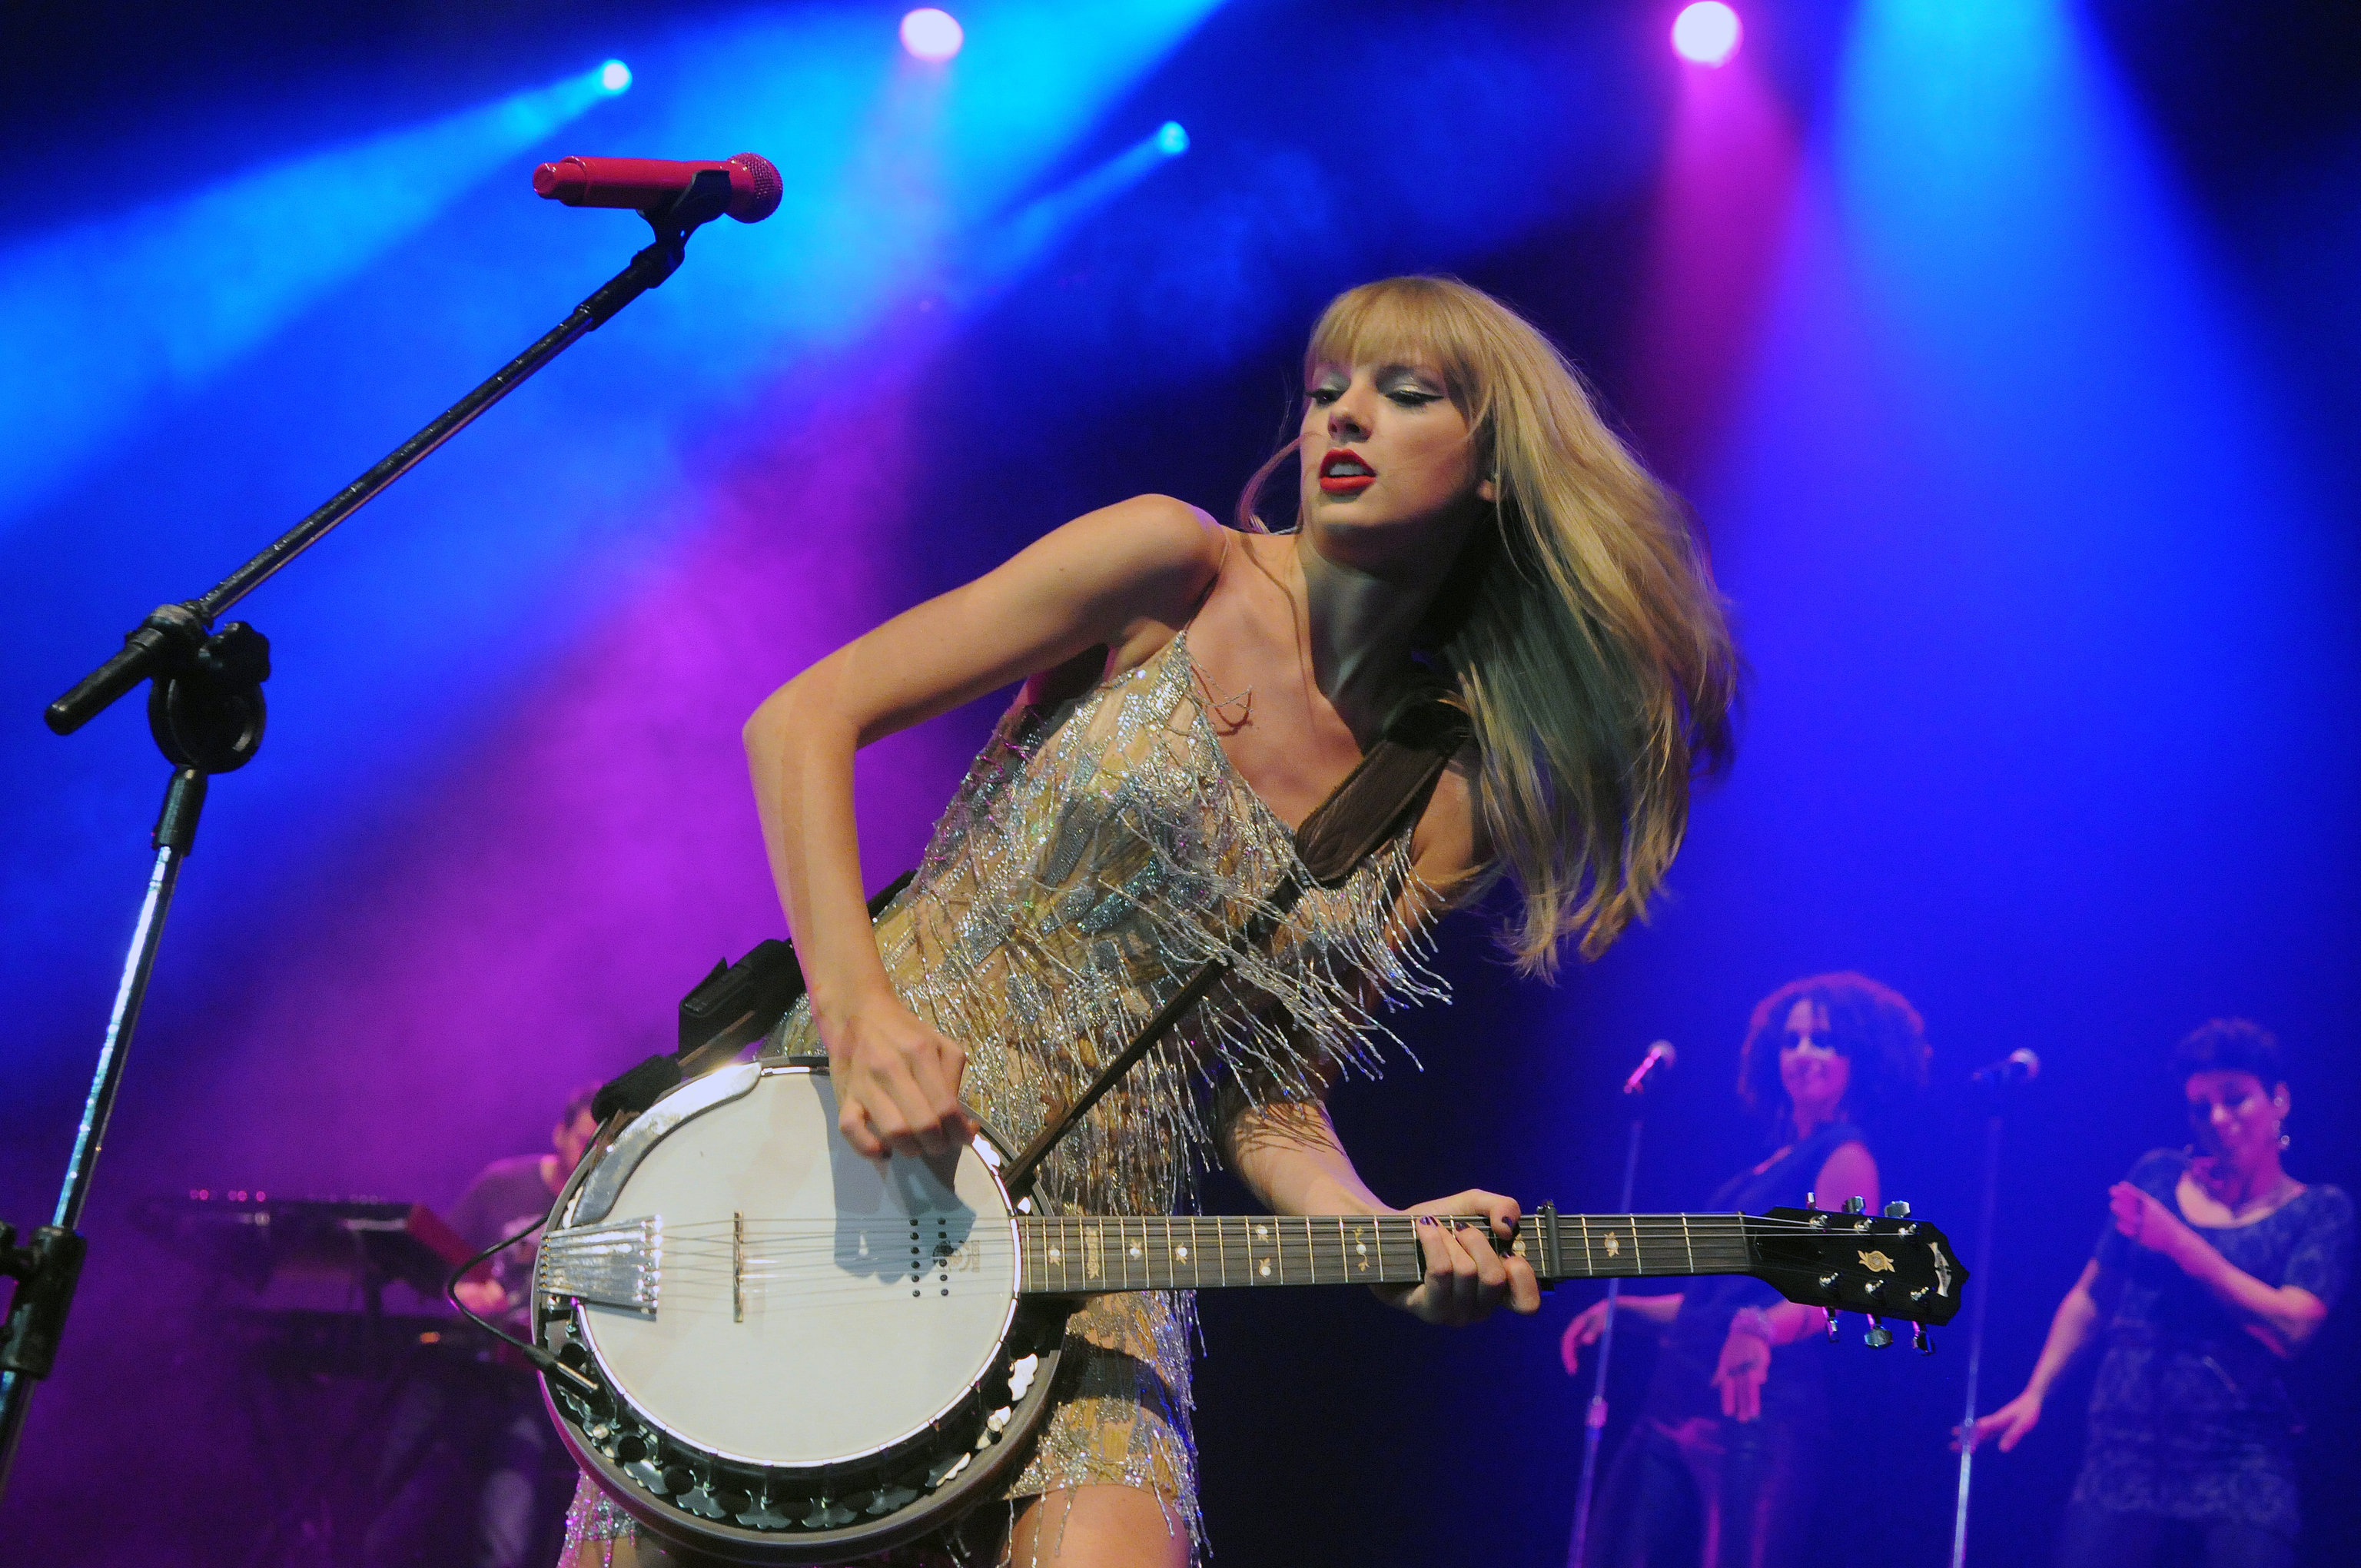 aylor Swift during her show in Rio de Janeiro on 2009